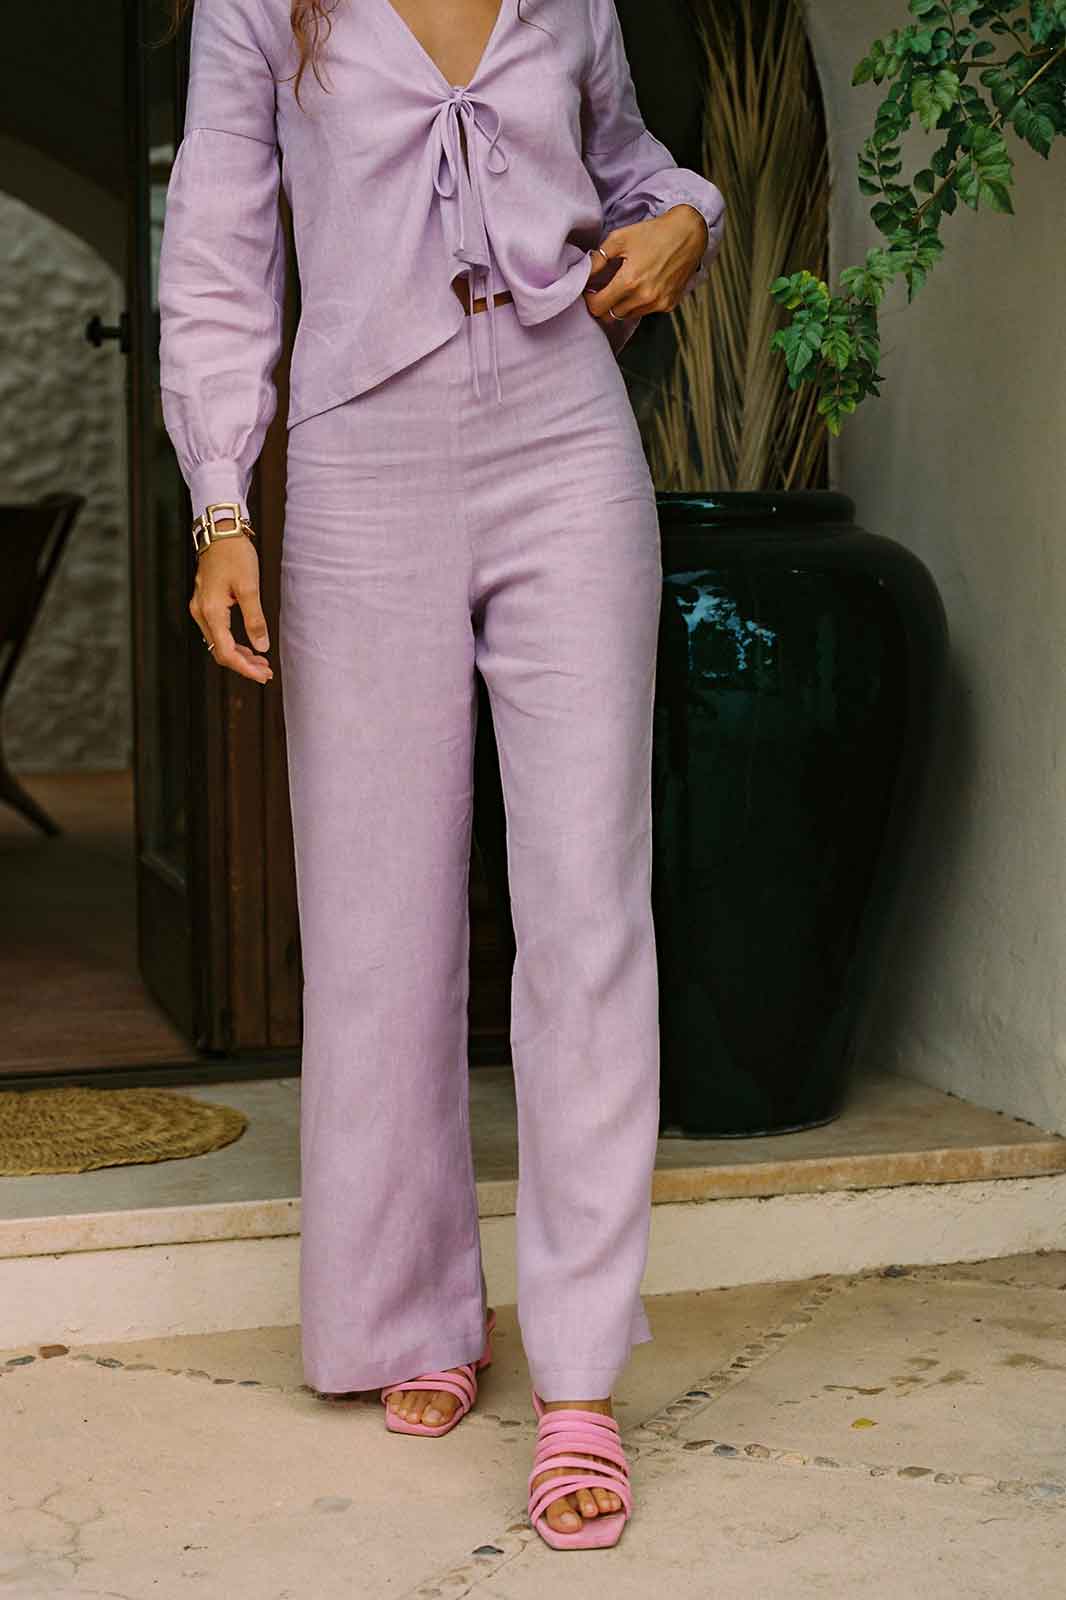 arkitaip Trousers The Clara Trousers in Lavender - Sample